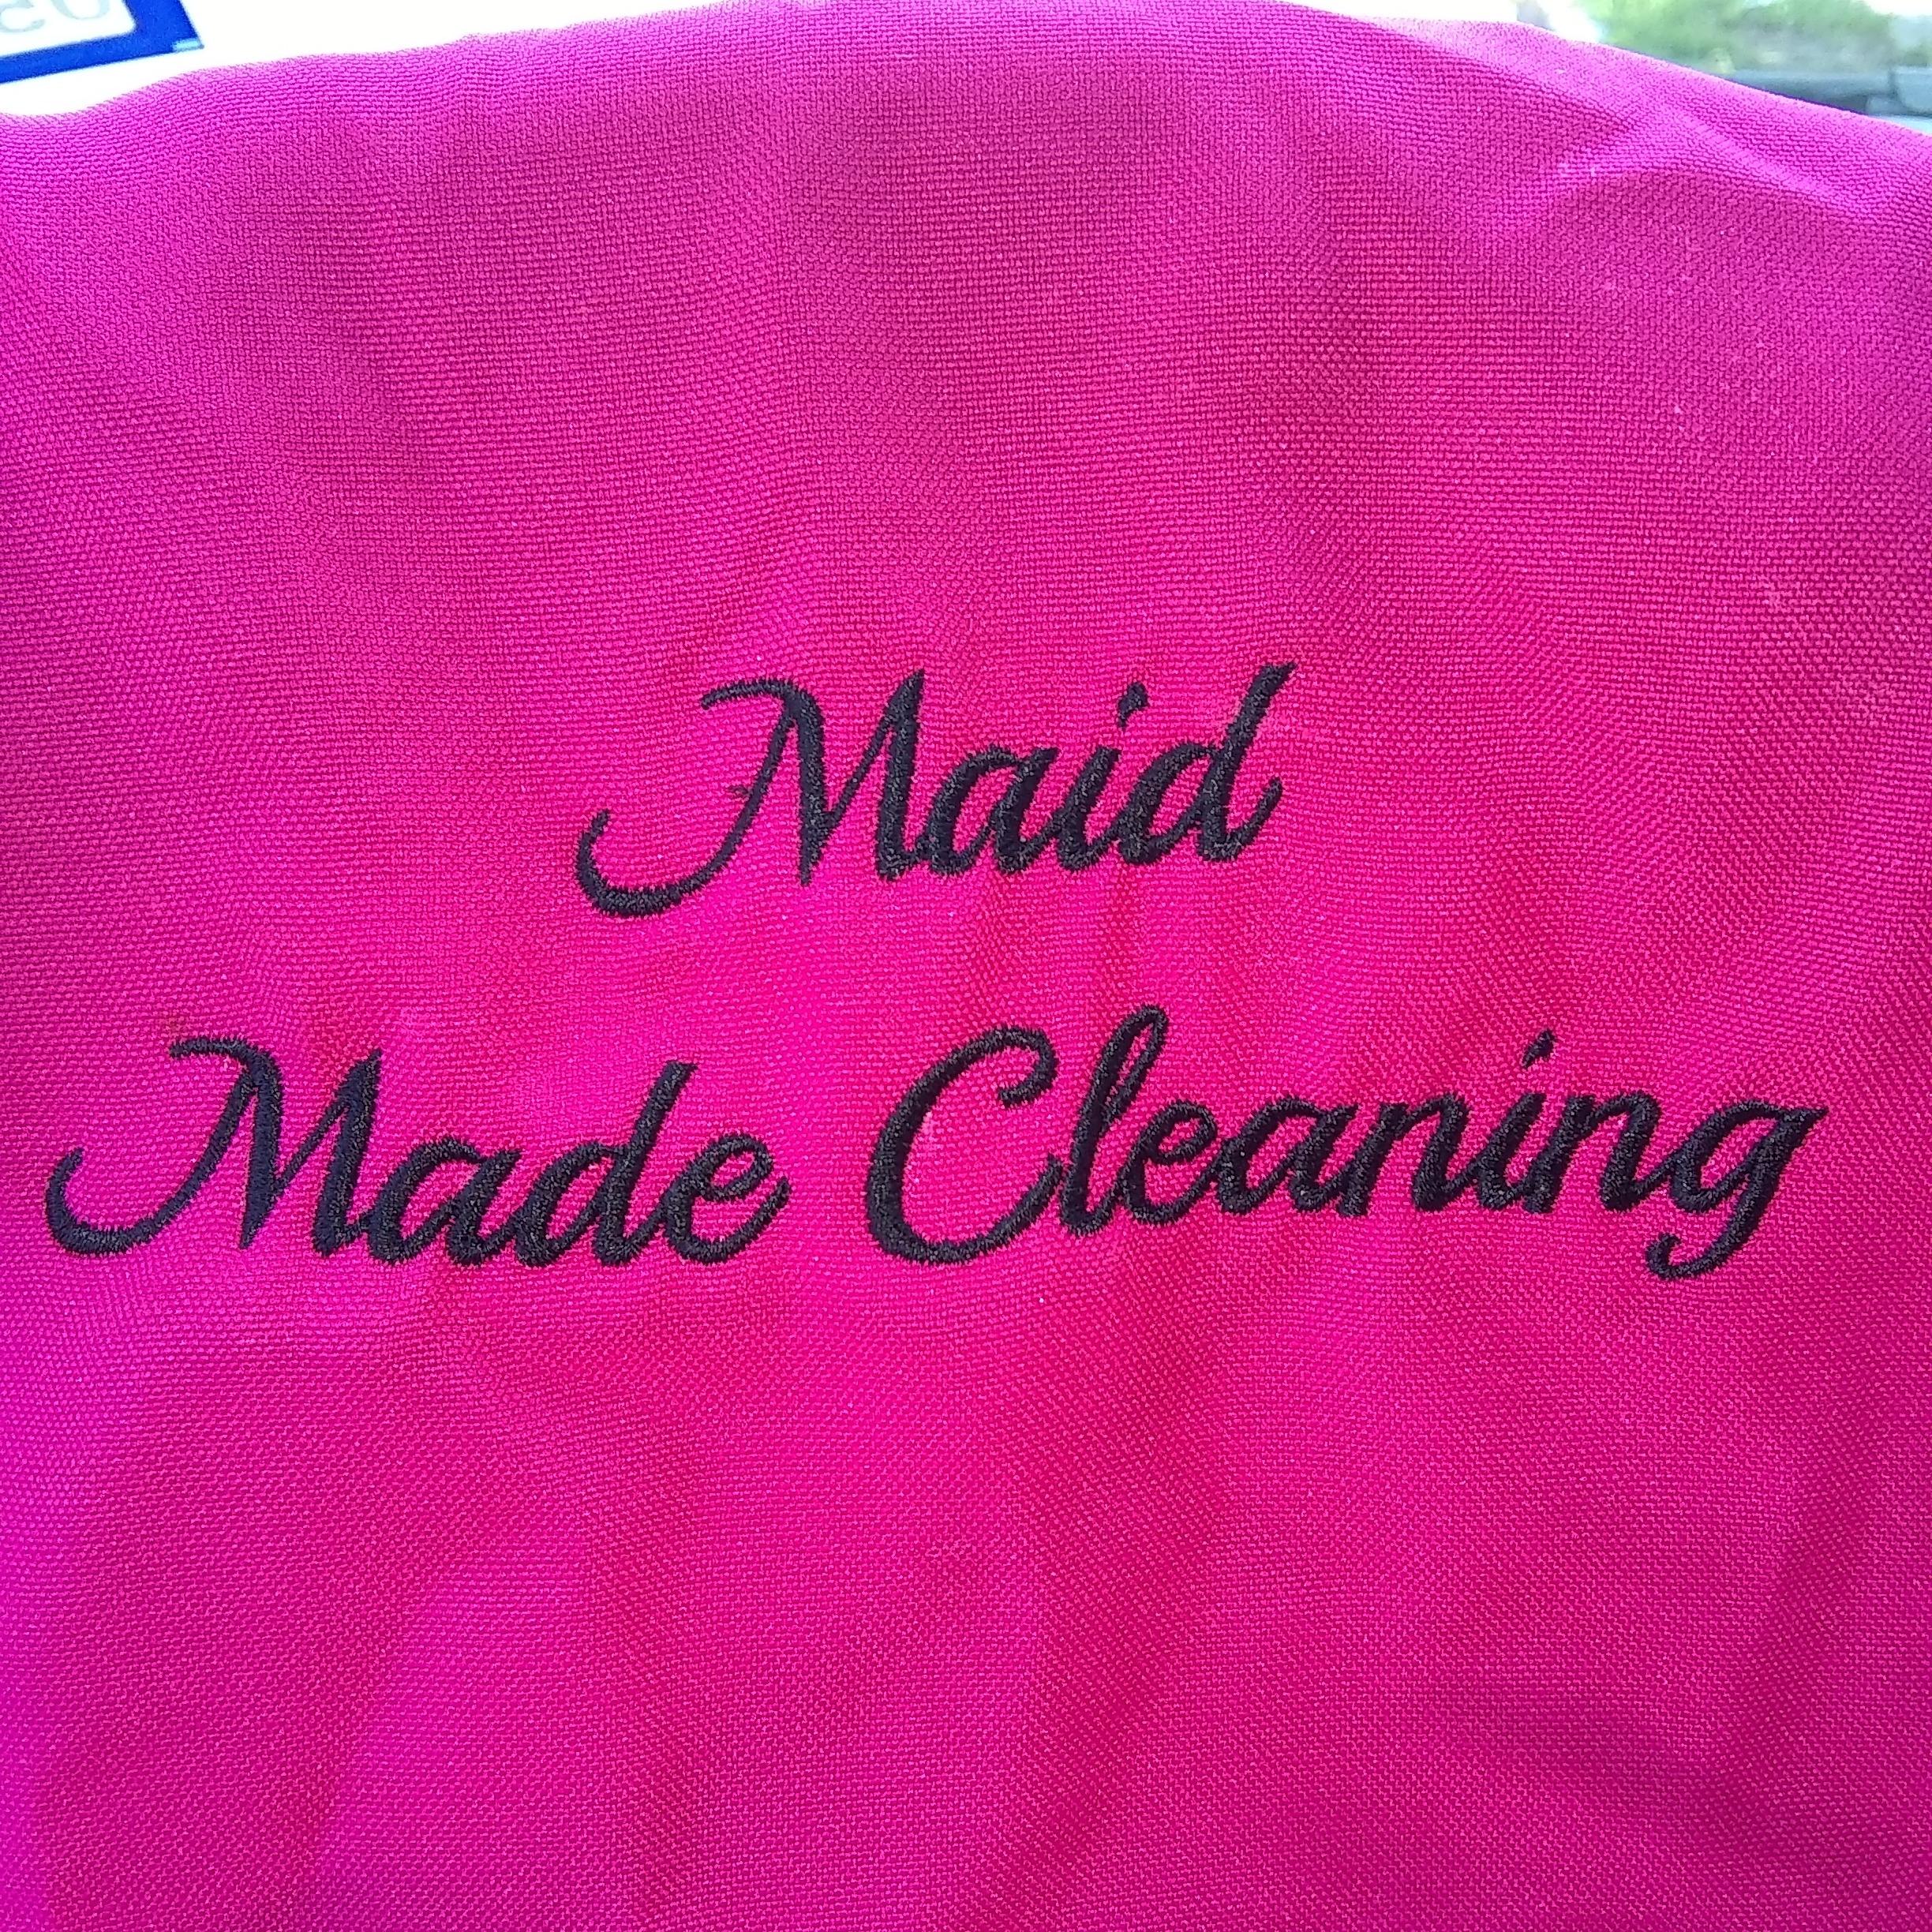 Maid Made Cleaning Logo